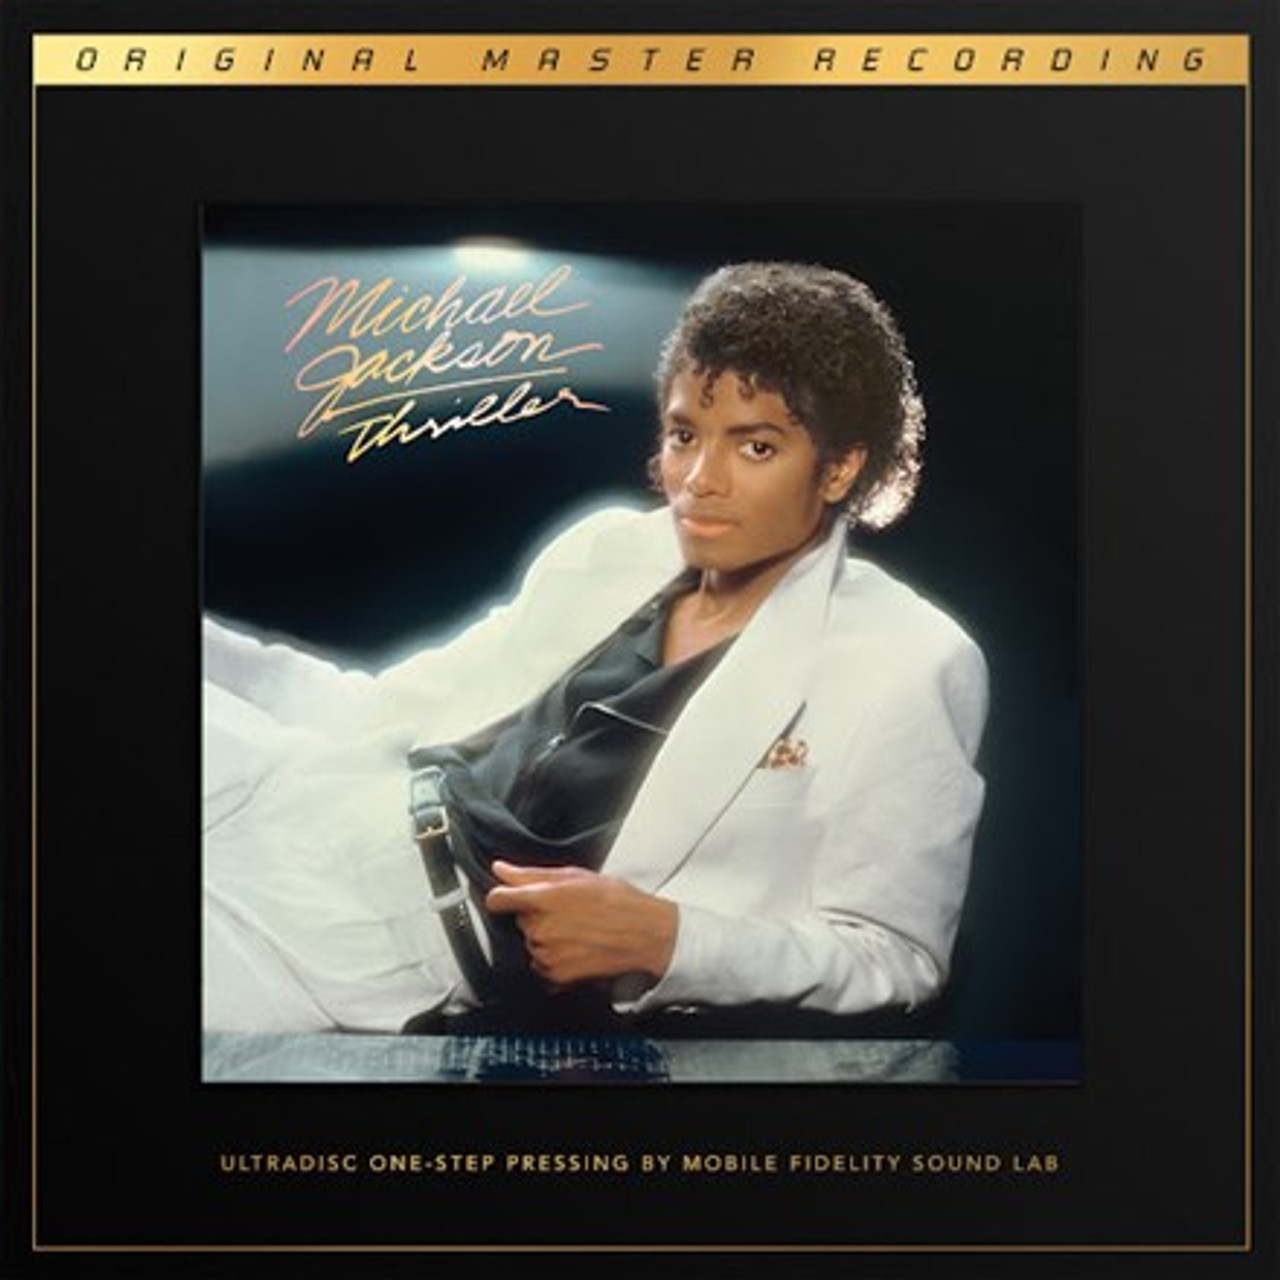 Michael Jackson - Thriller (Limited Edition UltraDisc One-Step